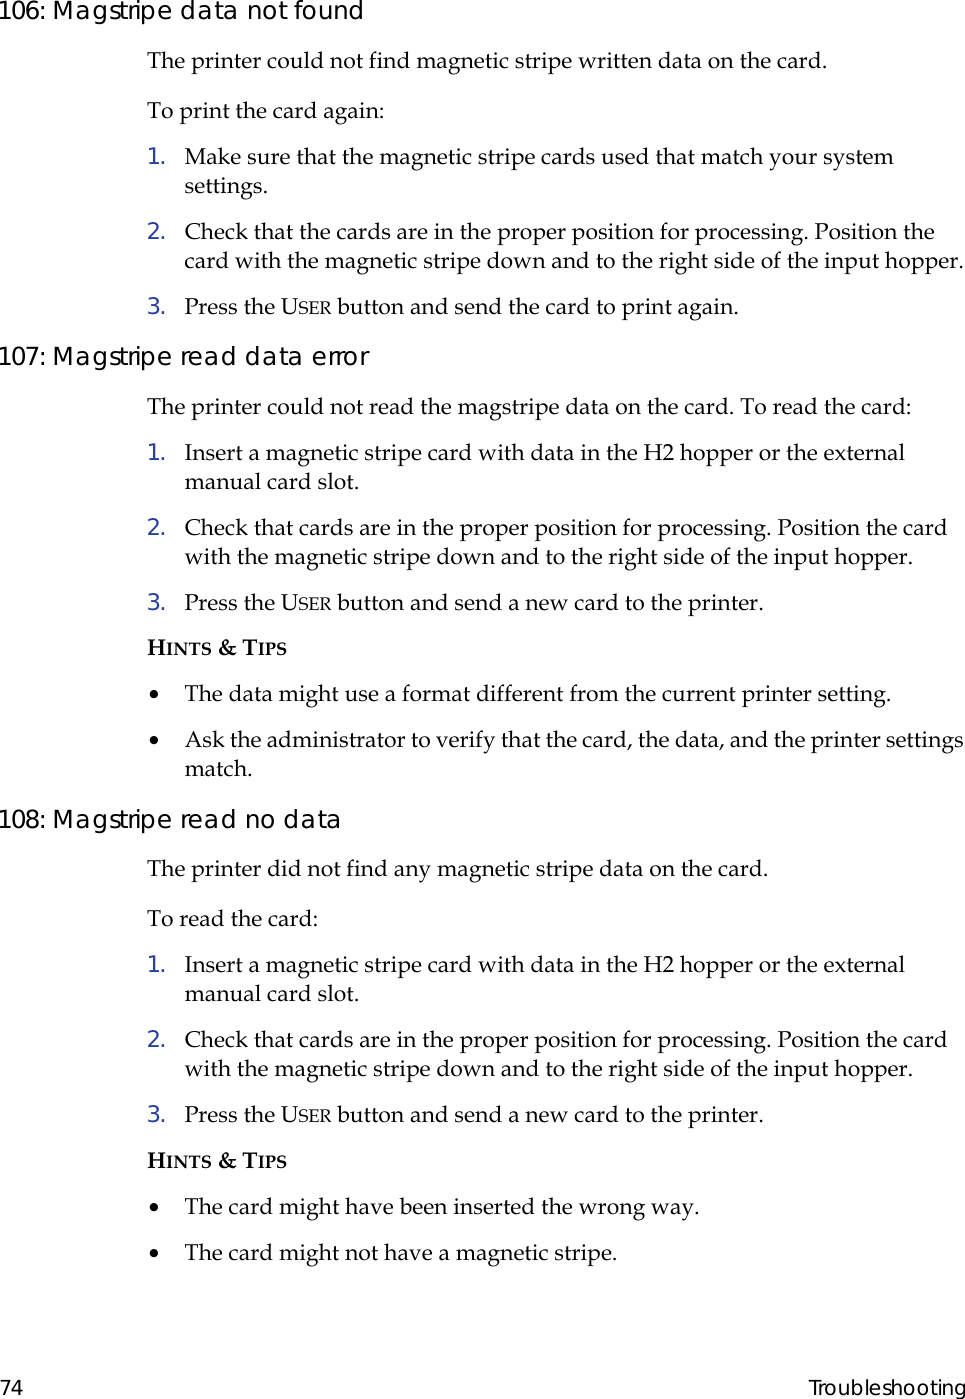  74 Troubleshooting106: Magstripe data not foundThe printer could not find magnetic stripe written data on the card.To print the card again:1.  Make sure that the magnetic stripe cards used that match your system settings.2.  Check that the cards are in the proper position for processing. Position the card with the magnetic stripe down and to the right side of the input hopper.3.  Press the USER button and send the card to print again.107: Magstripe read data errorThe printer could not read the magstripe data on the card. To read the card:1.  Insert a magnetic stripe card with data in the H2 hopper or the external manual card slot.2.  Check that cards are in the proper position for processing. Position the card with the magnetic stripe down and to the right side of the input hopper.3.  Press the USER button and send a new card to the printer.HINTS &amp; TIPS•  The data might use a format different from the current printer setting.•  Ask the administrator to verify that the card, the data, and the printer settings match.108: Magstripe read no dataThe printer did not find any magnetic stripe data on the card.To read the card:1.  Insert a magnetic stripe card with data in the H2 hopper or the external manual card slot.2.  Check that cards are in the proper position for processing. Position the card with the magnetic stripe down and to the right side of the input hopper.3.  Press the USER button and send a new card to the printer.HINTS &amp; TIPS•  The card might have been inserted the wrong way.•  The card might not have a magnetic stripe.                                                     